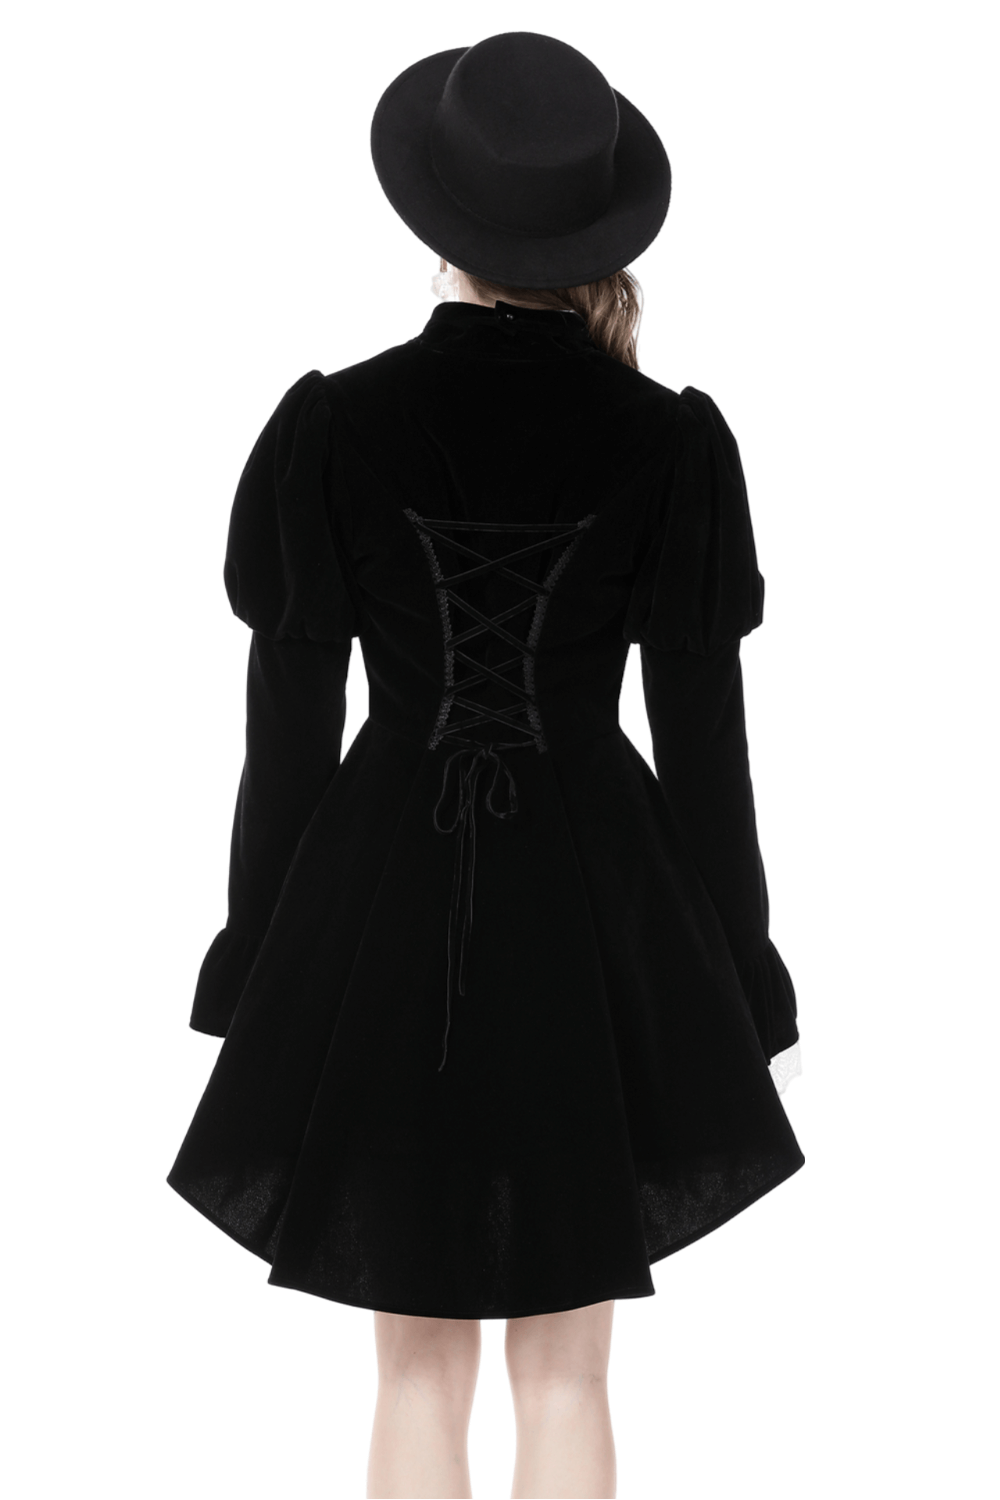 Black Velvet Gothic Coat with White Lace Collar and Cuffs